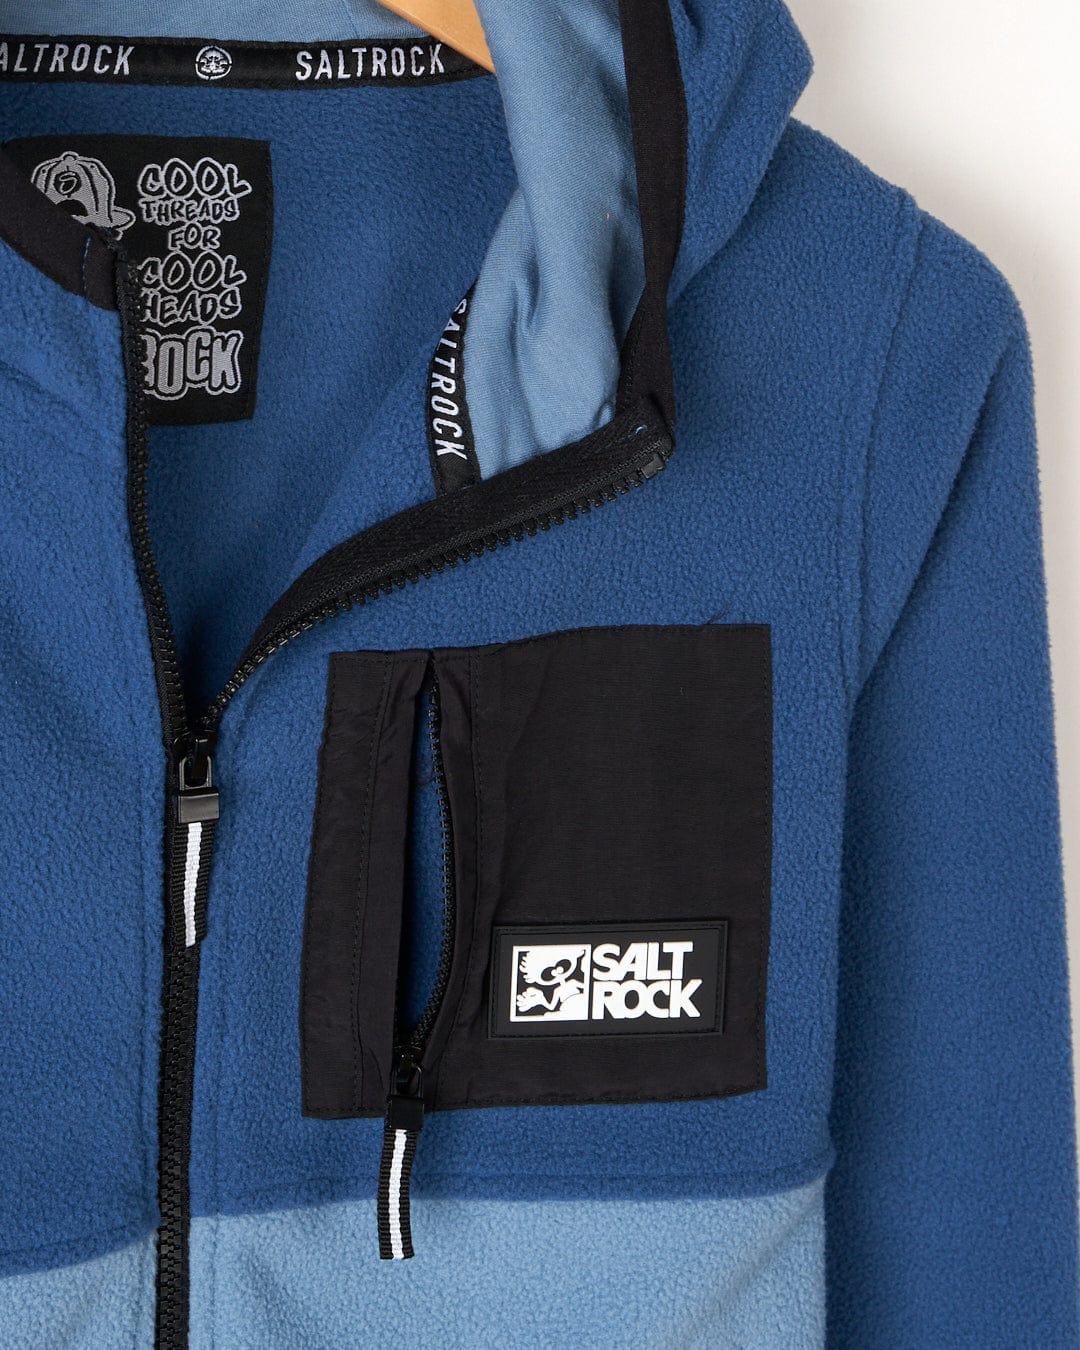 A Saltrock blue and black hoodie with a logo on it, made of Re-Issue - Kids Fleece.